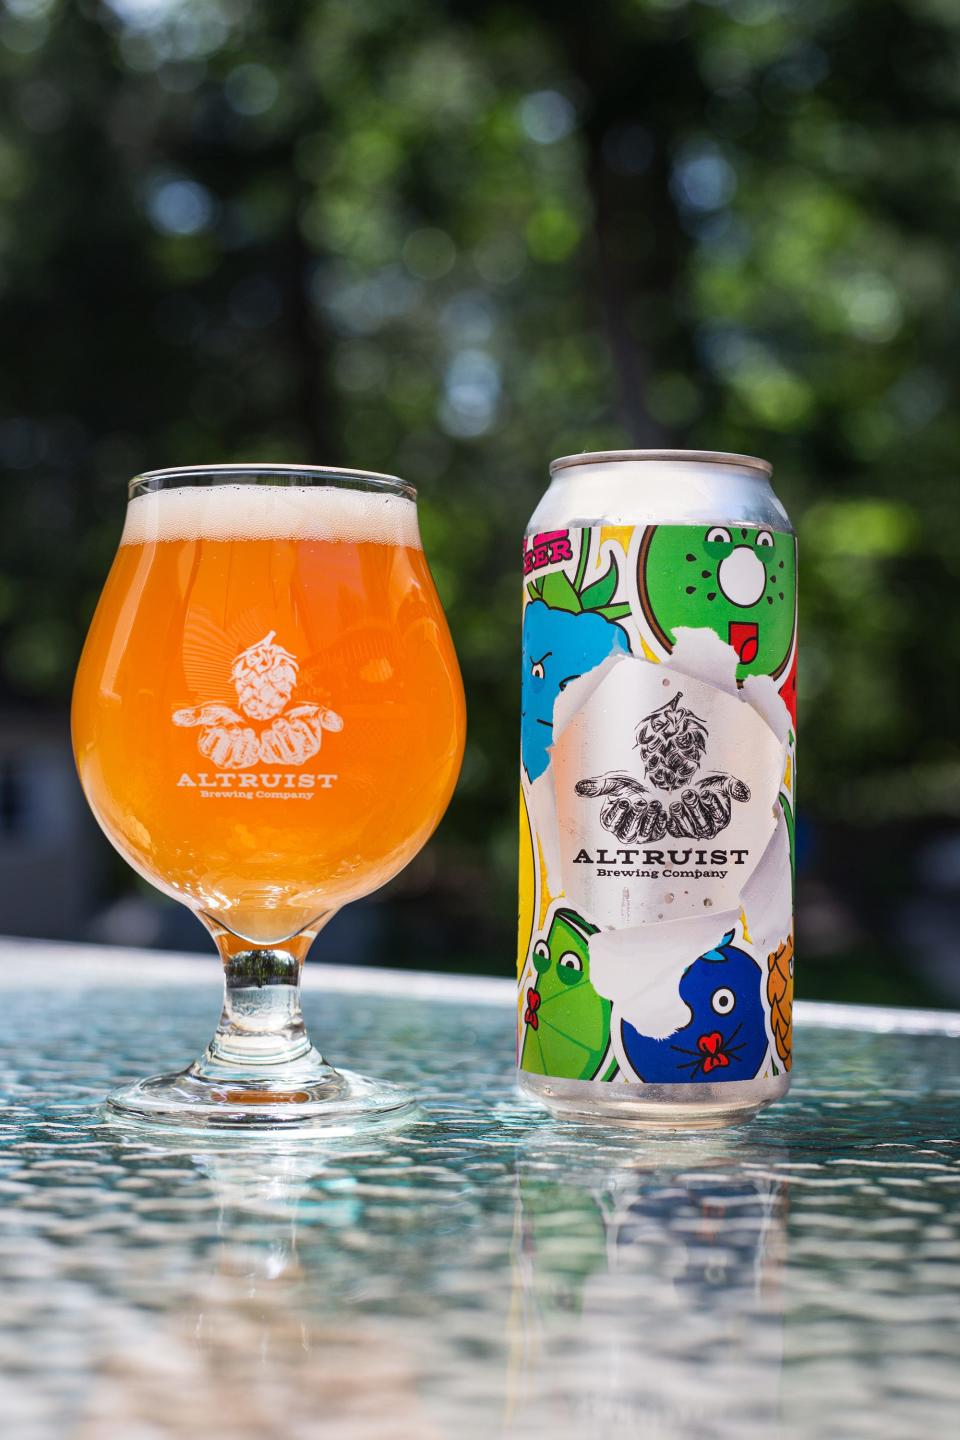 Non-beer drinkers love Altruist Brewing Co.'s sour ale Pucker Face. Altruist has brewed about seven different versions, including this riff with mango and dragonfruit.